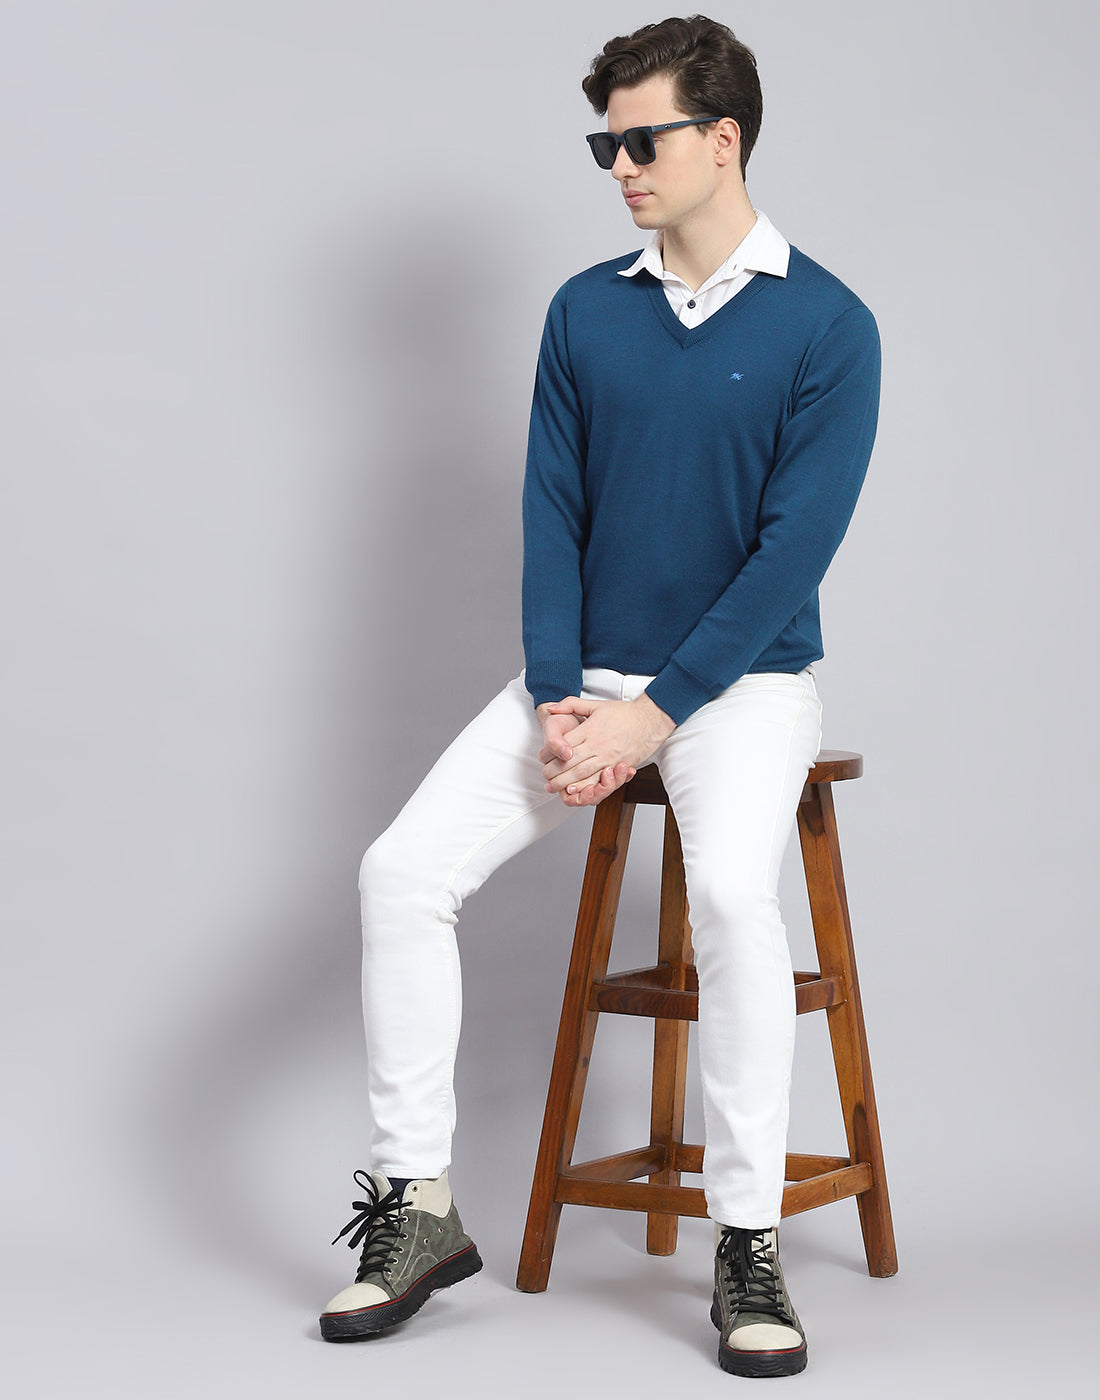 Light Blue Jeans with Purple Sweater Outfits For Men (7 ideas & outfits)